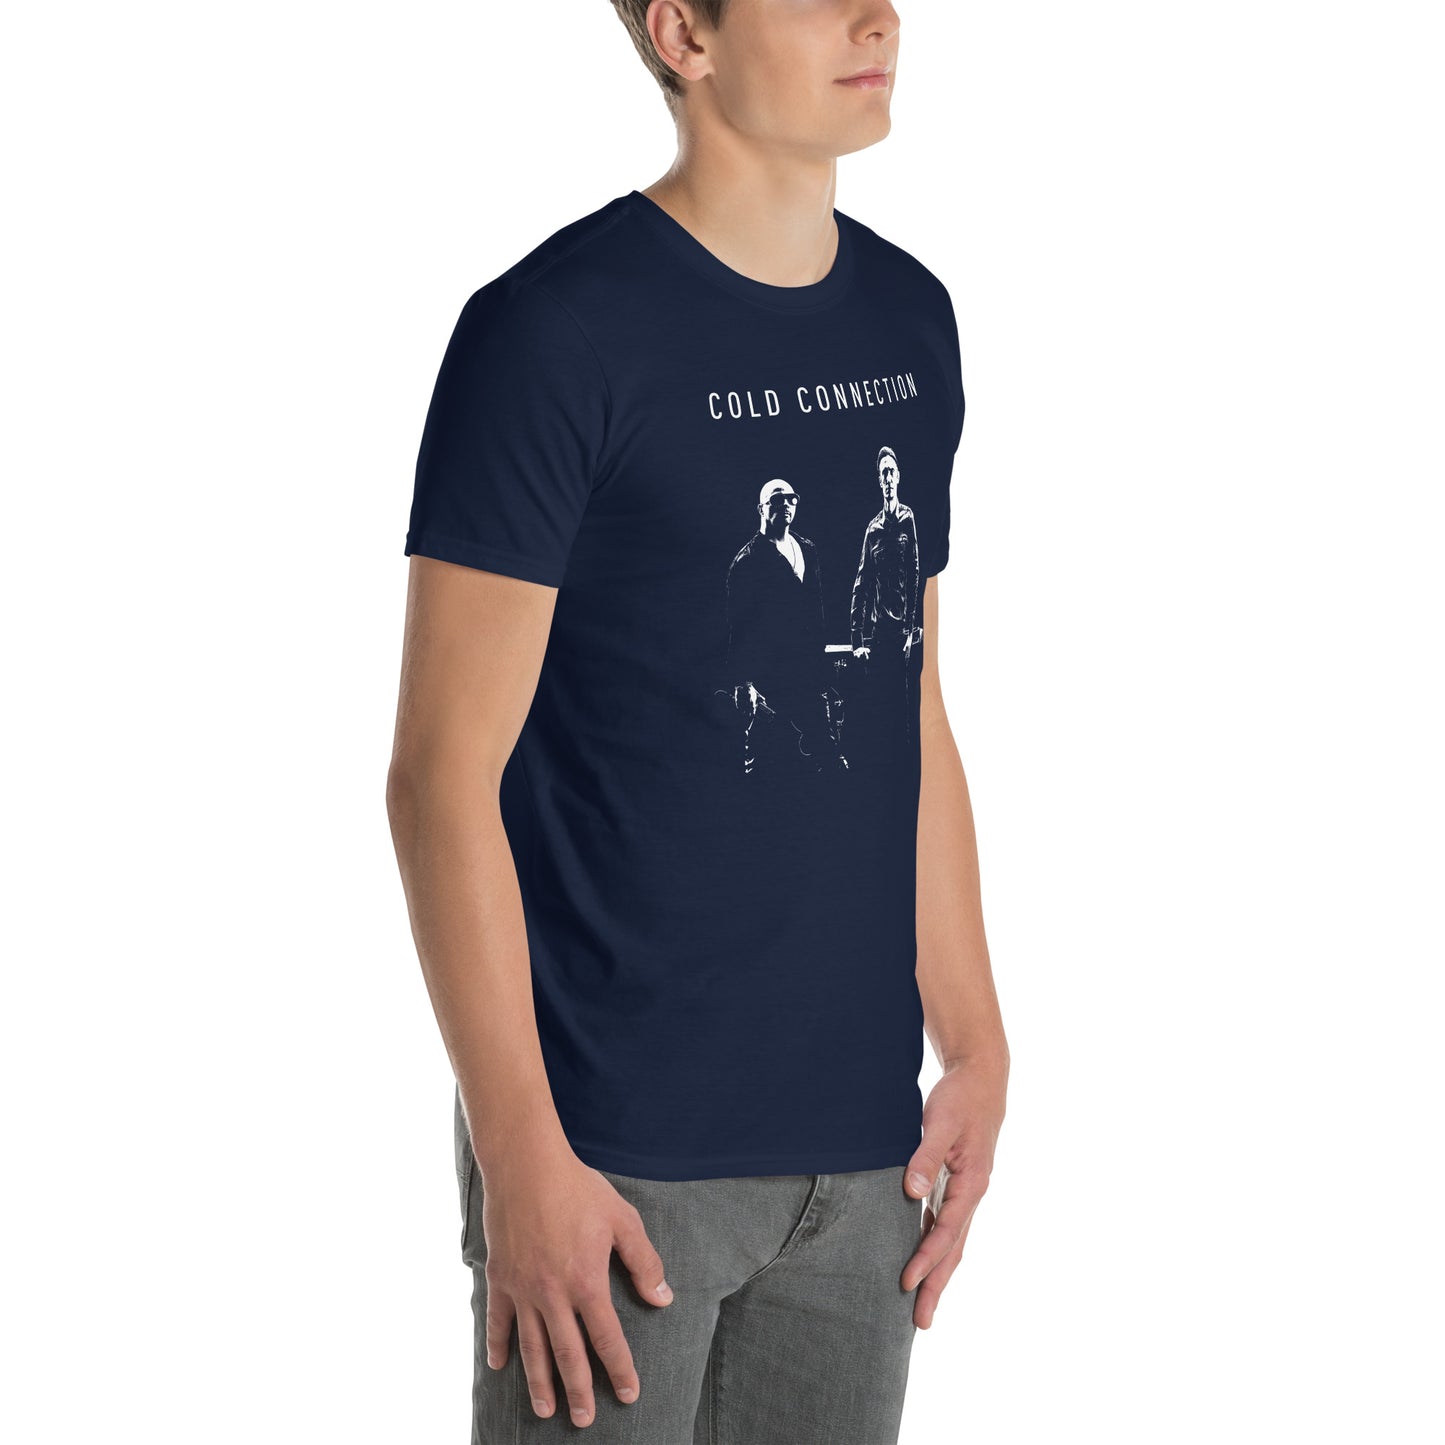 Cold Connection, Official photo 2024, Short-Sleeve Unisex T-Shirt